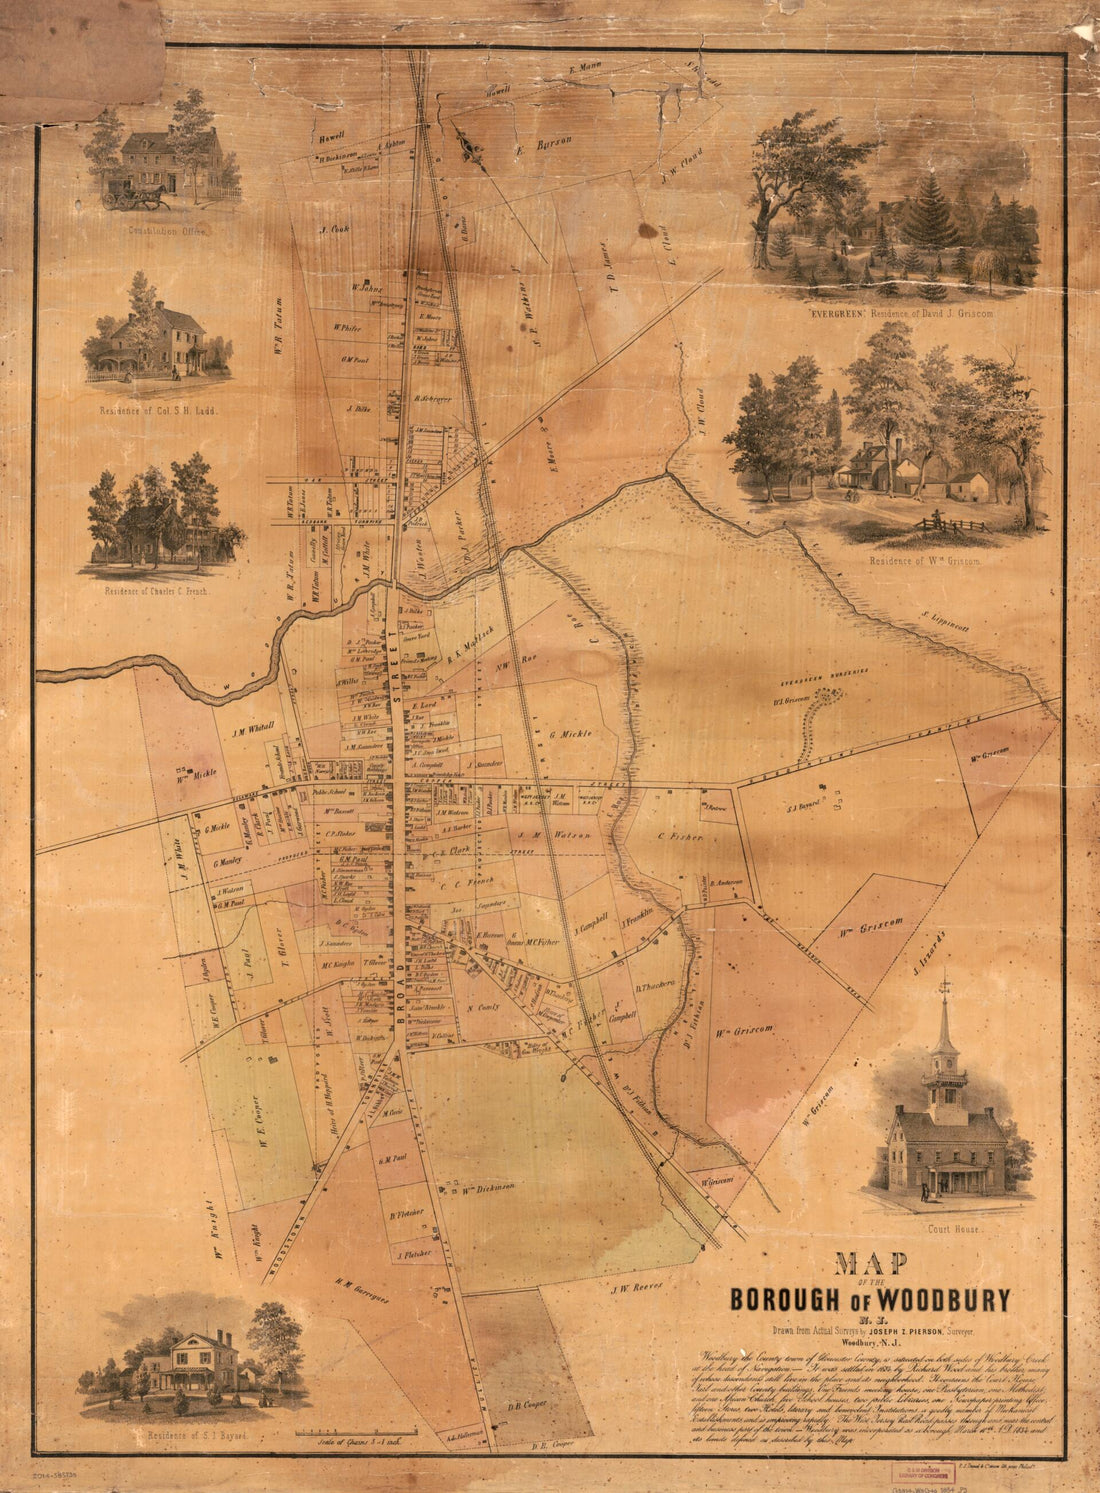 This old map of Map of the Borough of Woodbury, New Jersey from 1854 was created by  P.S. Duval &amp; Co, Joseph Z. Pierson,  Woodbury (N.J.) in 1854